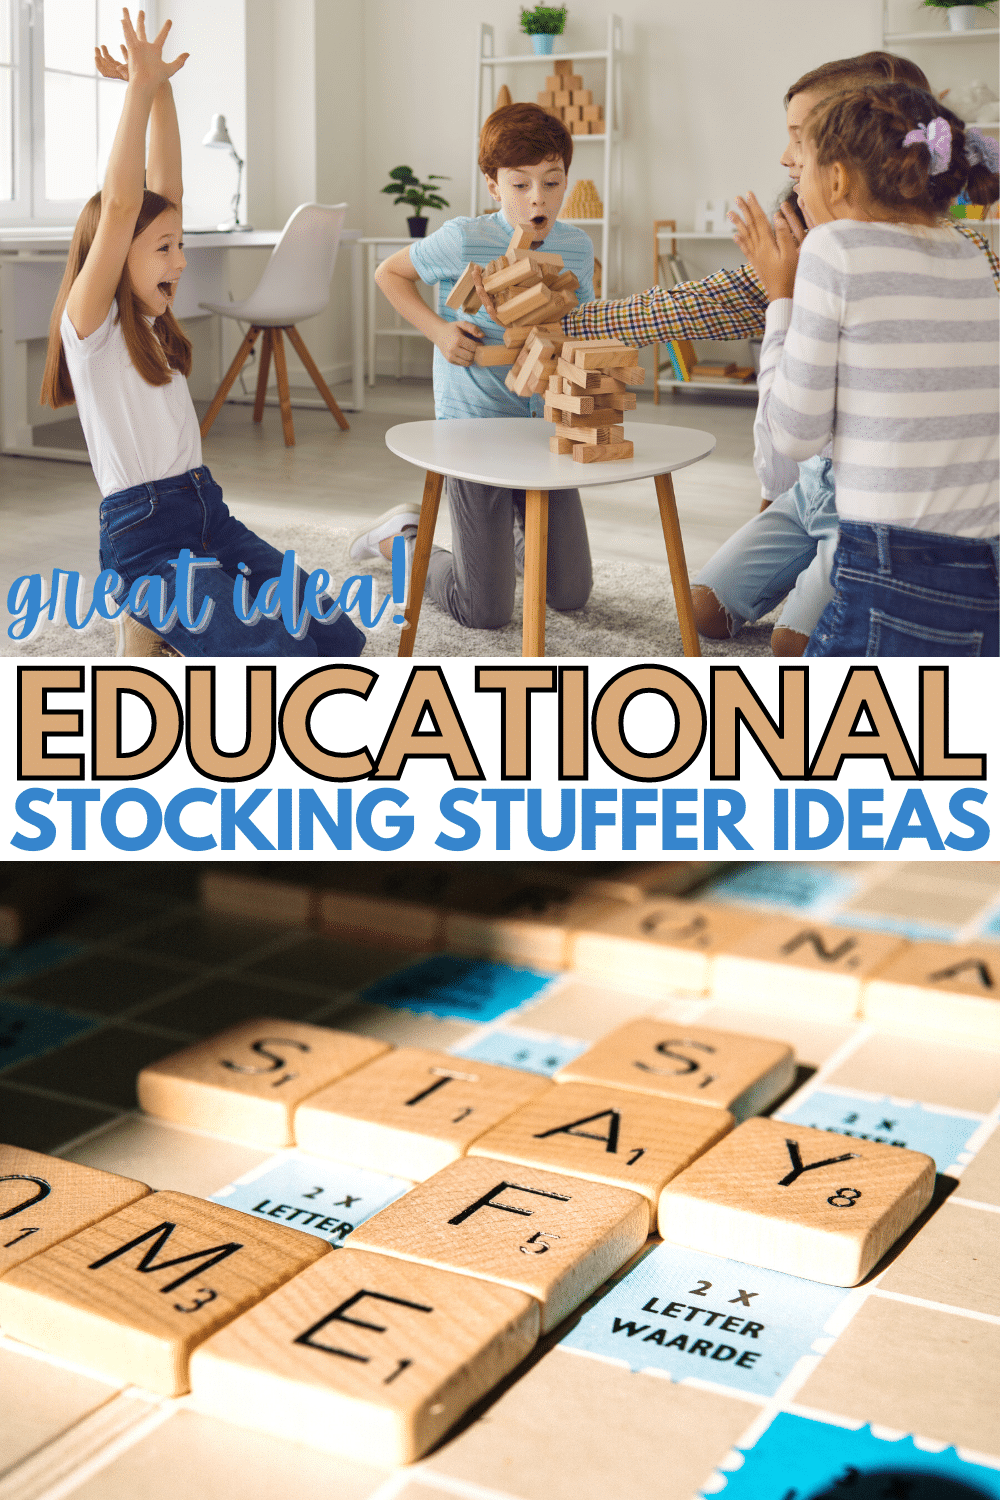 Educational Stocking Stuffer Ideas with title text reading Great Idea! Educational Stocking Stuffer Ideas